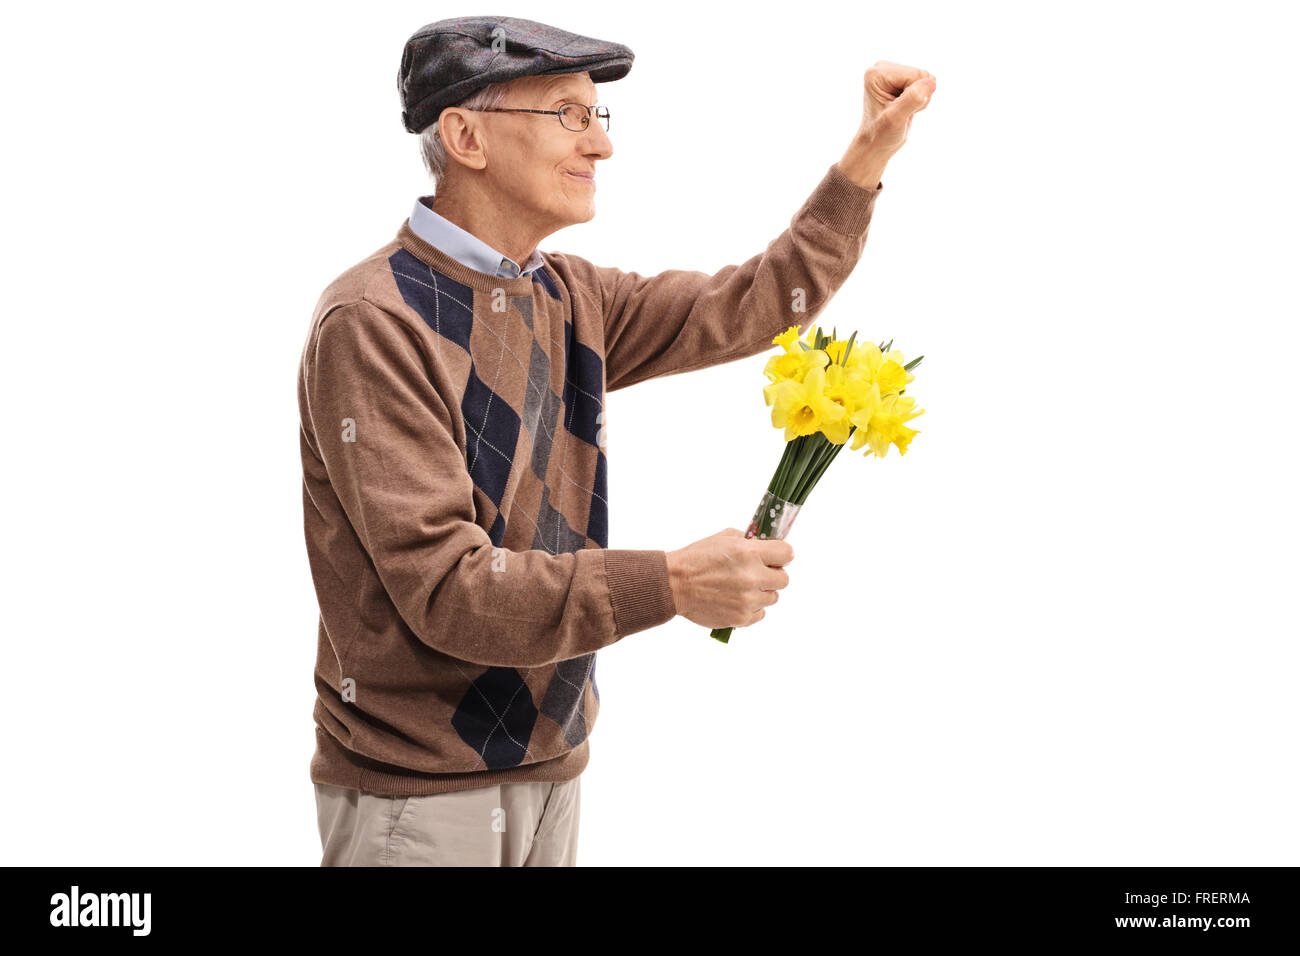 Senior holding flowers and preparing to knock on a door isolated on white background Stock Photo